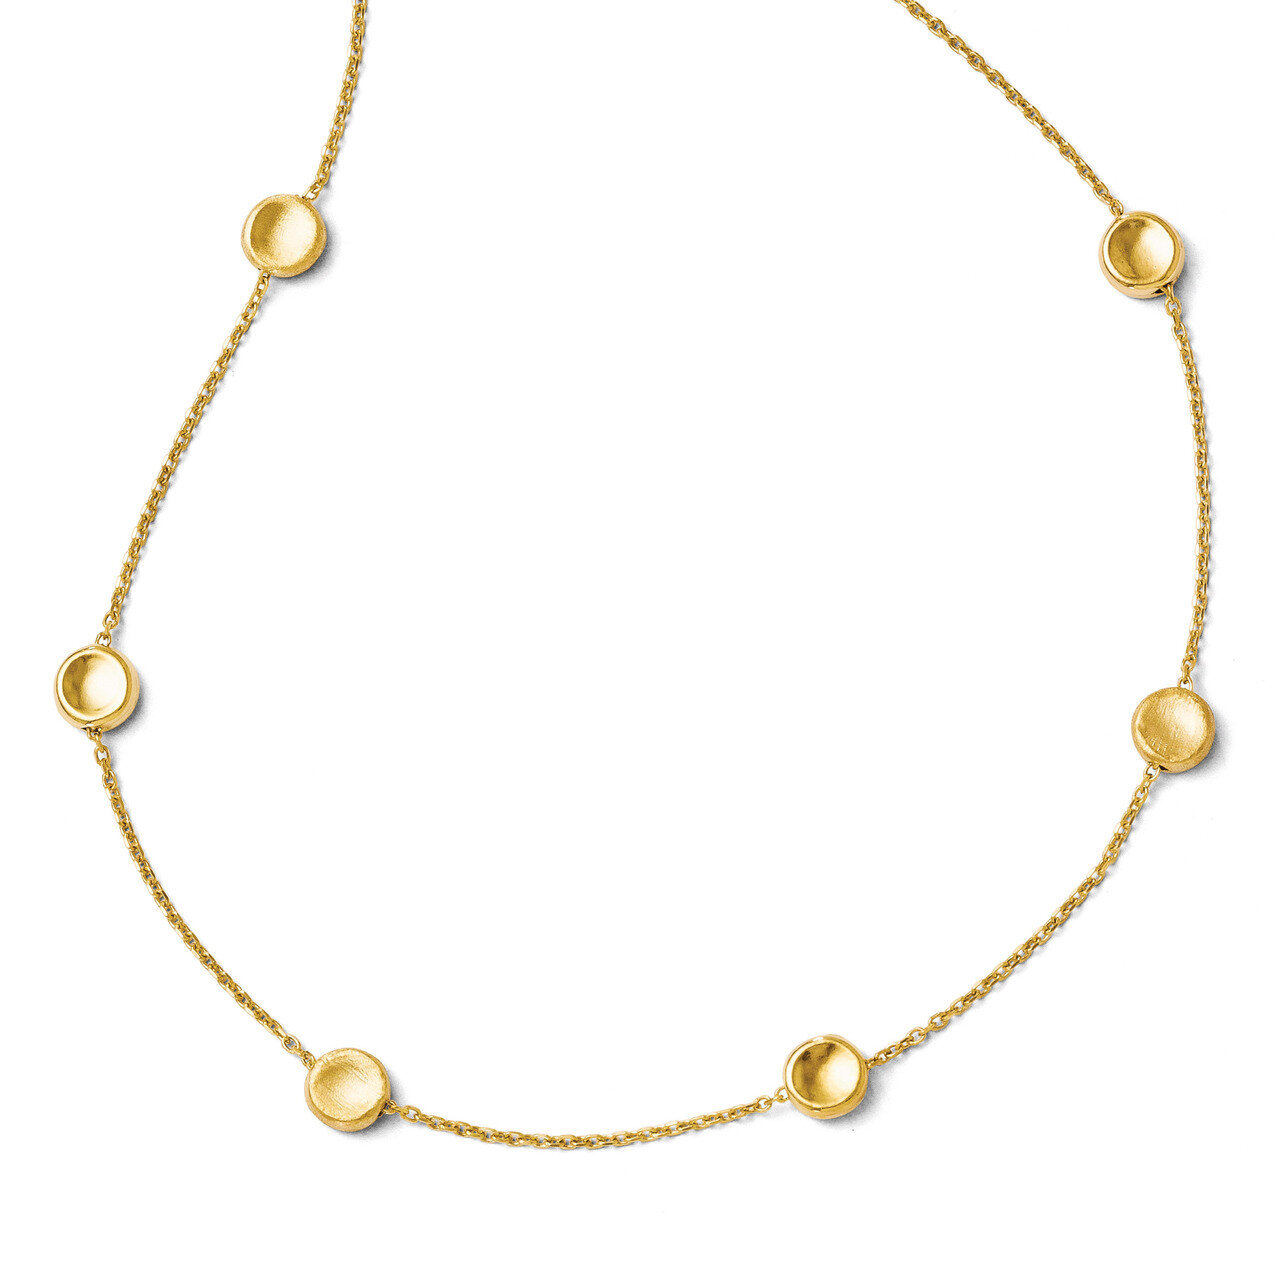 Polished and Satin Beaded Necklace - 14k Gold HB-LF243-18